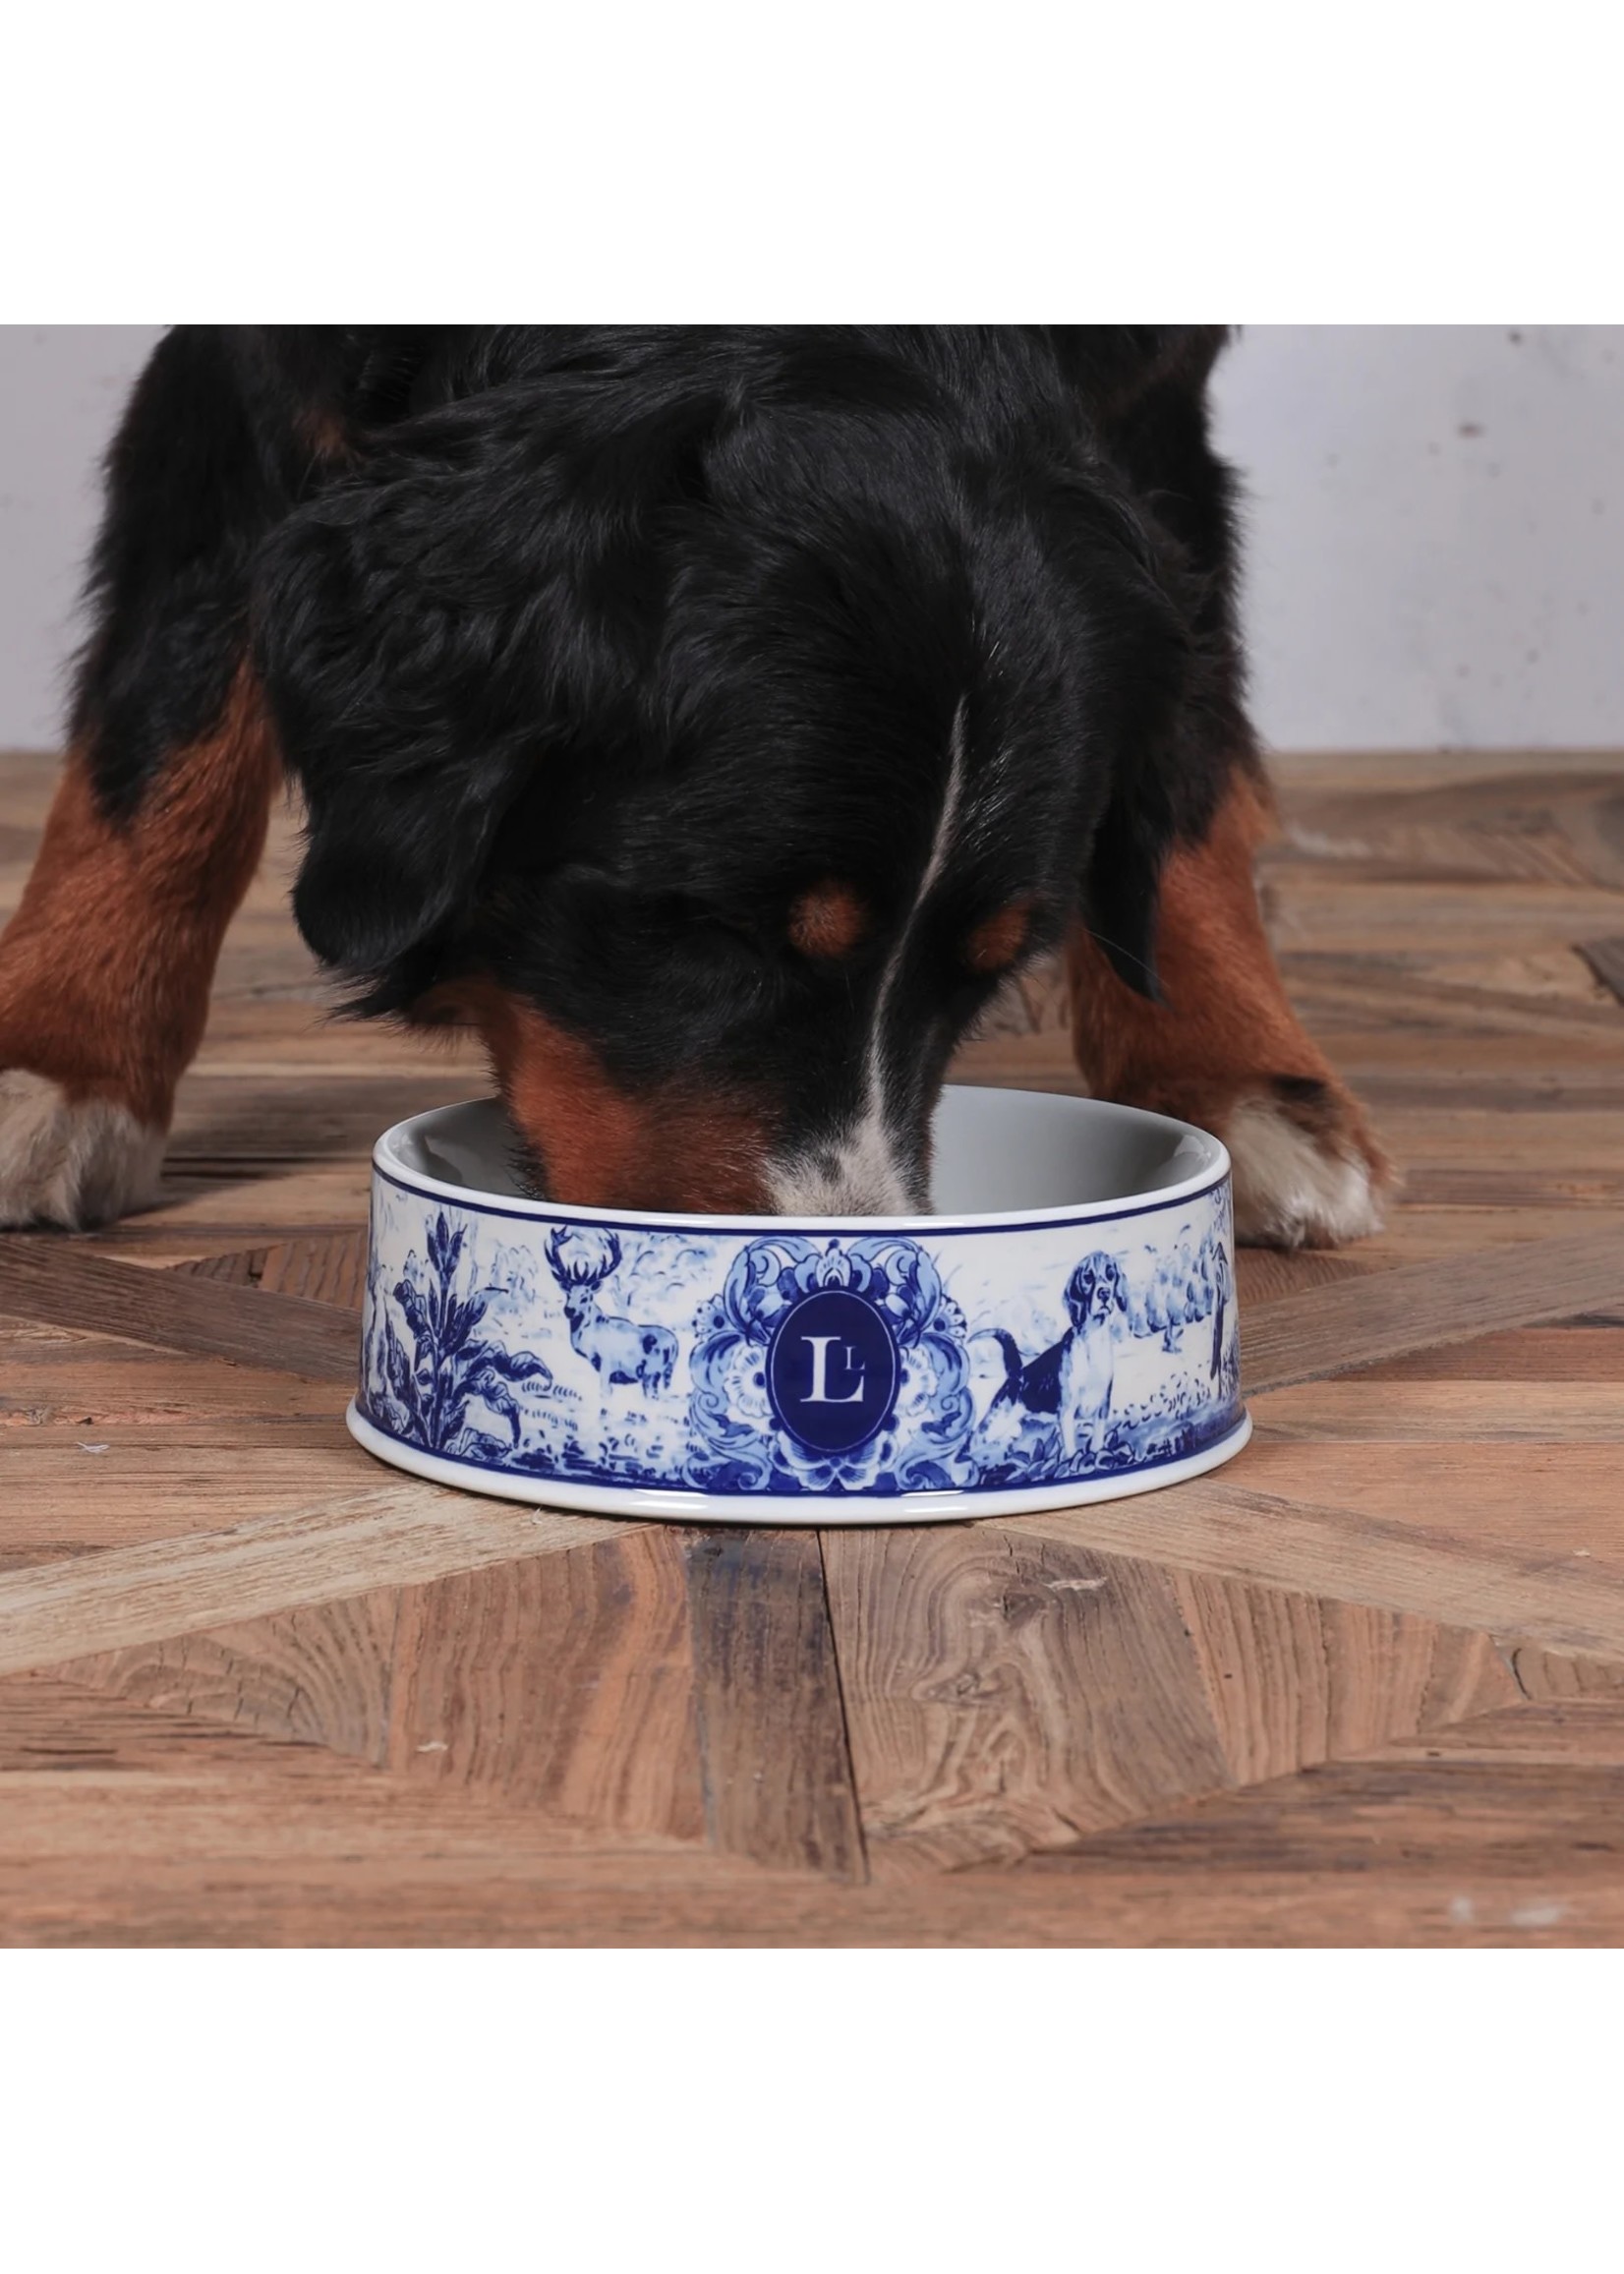 Dog Bowl - Royal Delft The Enchanted Forest Small